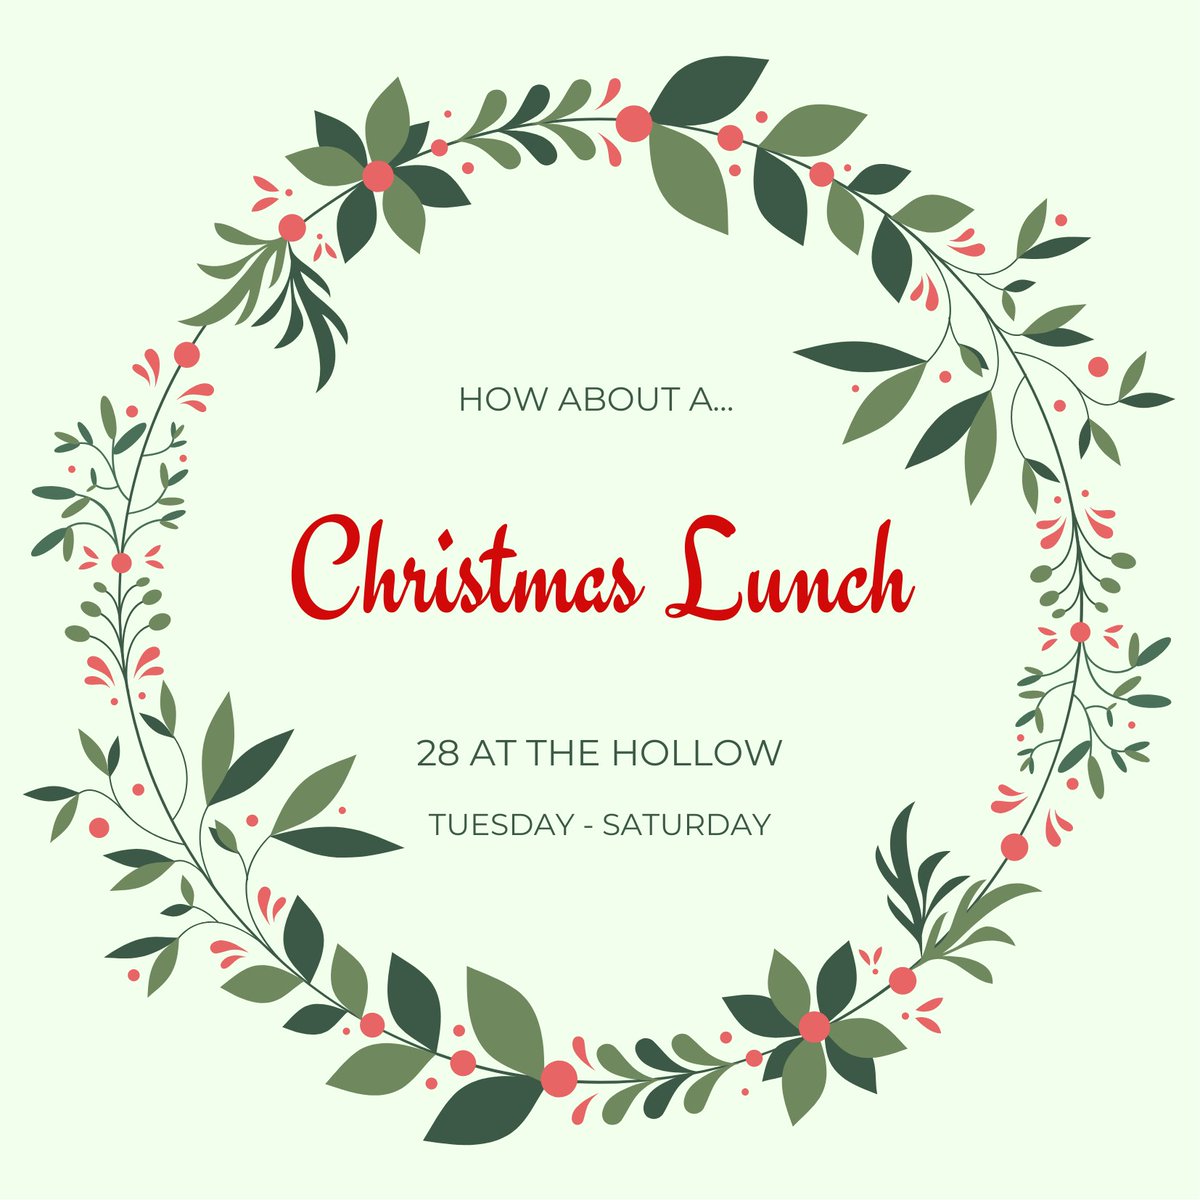 Christmas Lunch at 28. How does that sound? Check out our menu. Open Tuesday to Saturday for lunch and dinner.